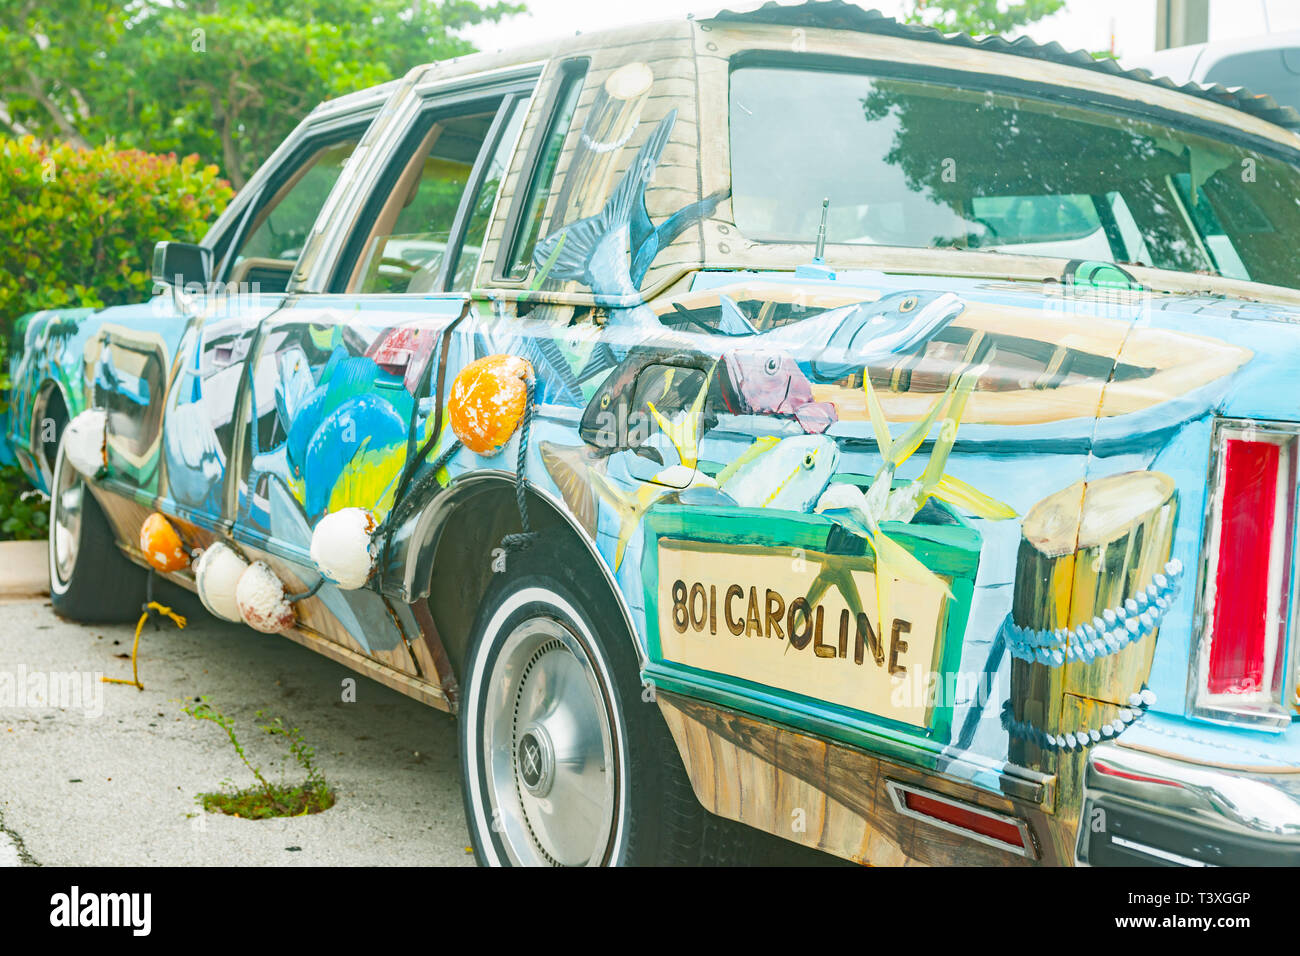 KEY WEST USA - JUNE 26 2012; Old battered car painted with wildlife and floral scene in rustic fashion parked up. Stock Photo